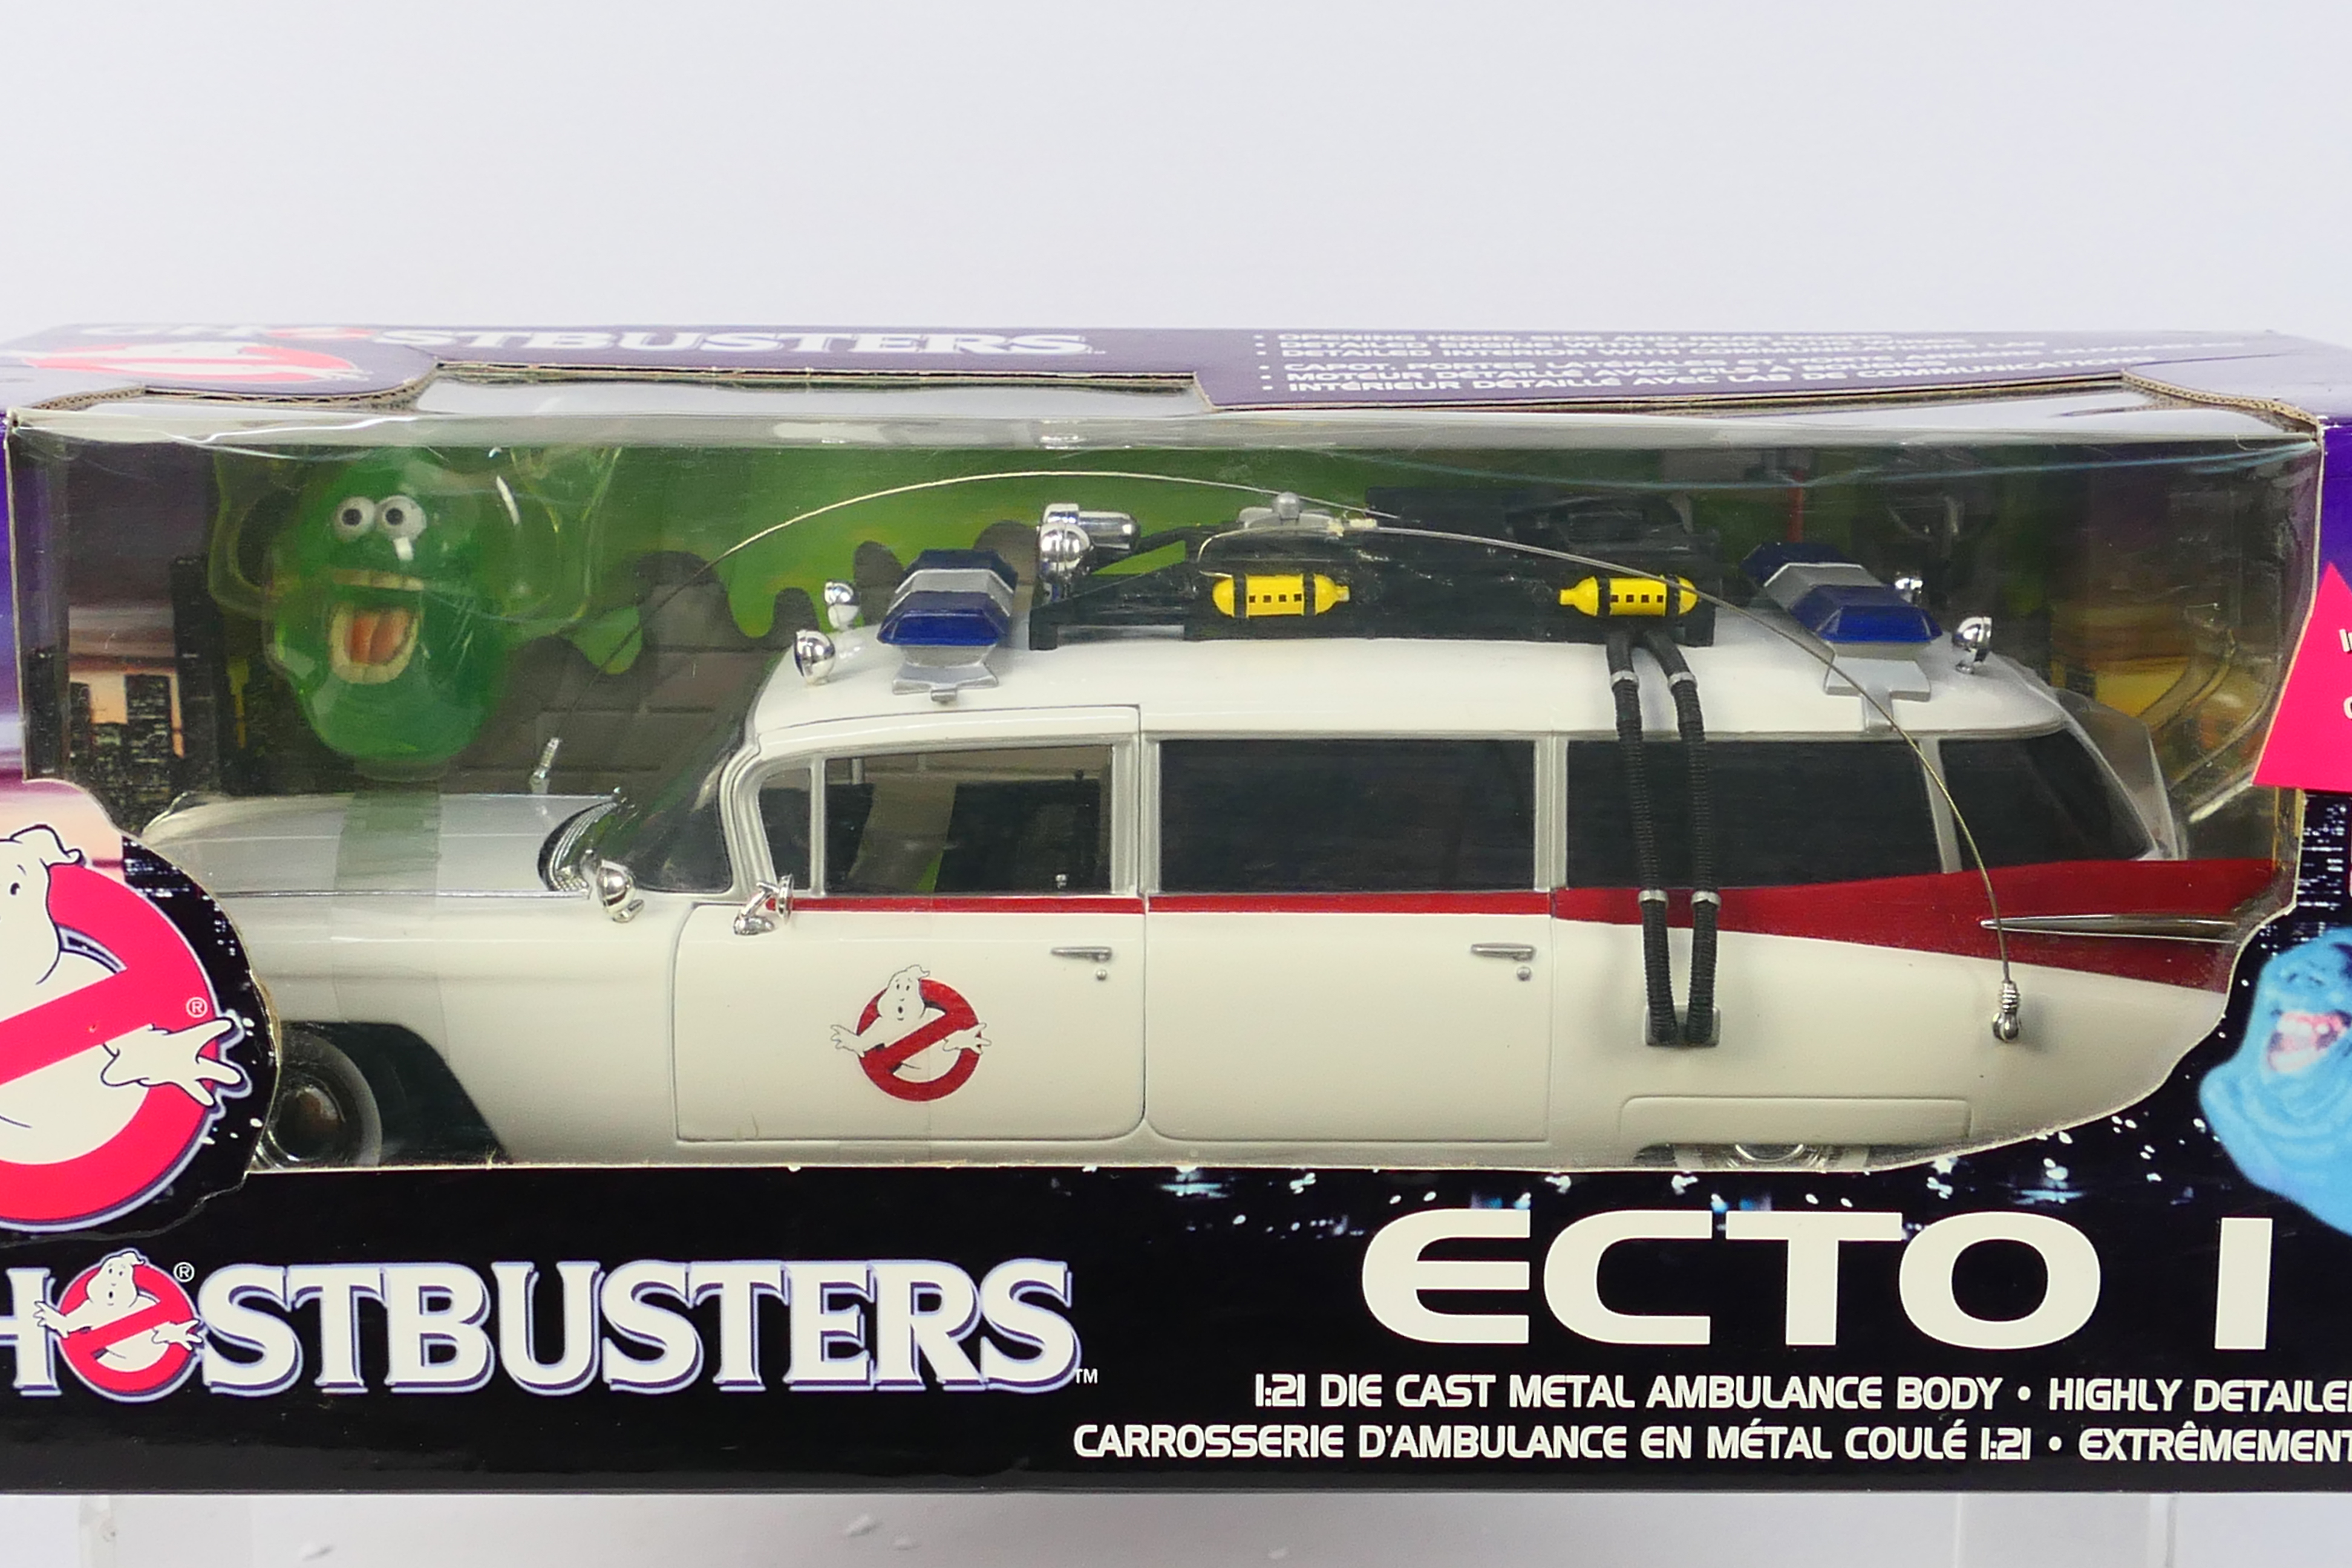 JoyRide - A boxed 1:18 scale Ghostbusters Ecto 1 Cadillac Ambulance # 33538. - Image 2 of 6